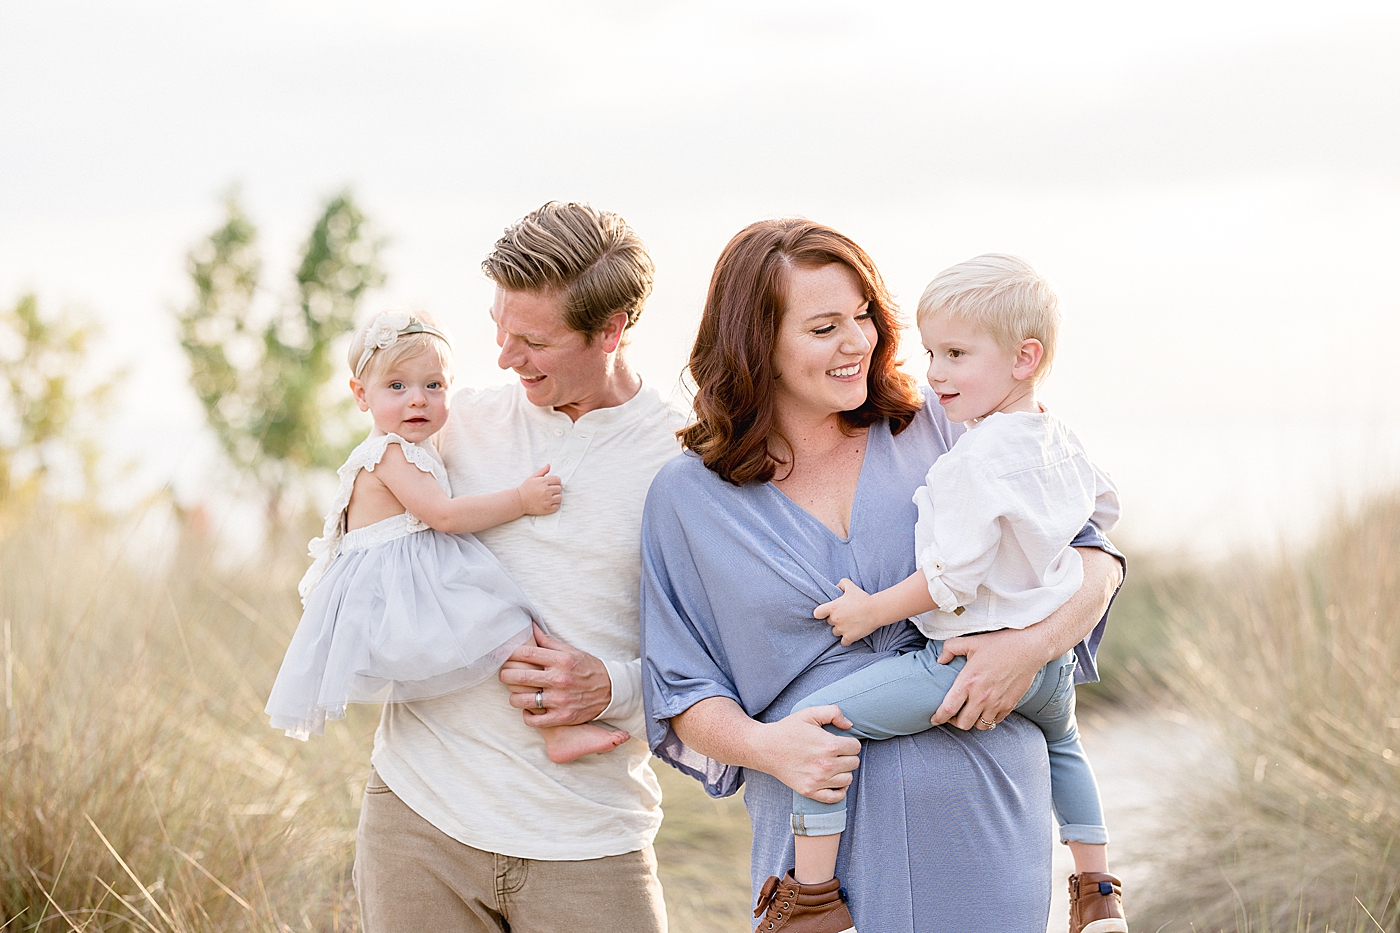 Family portraits at sunset at Cypress Point Park in Tampa, FL. Photo by Brittany Elise Photography.